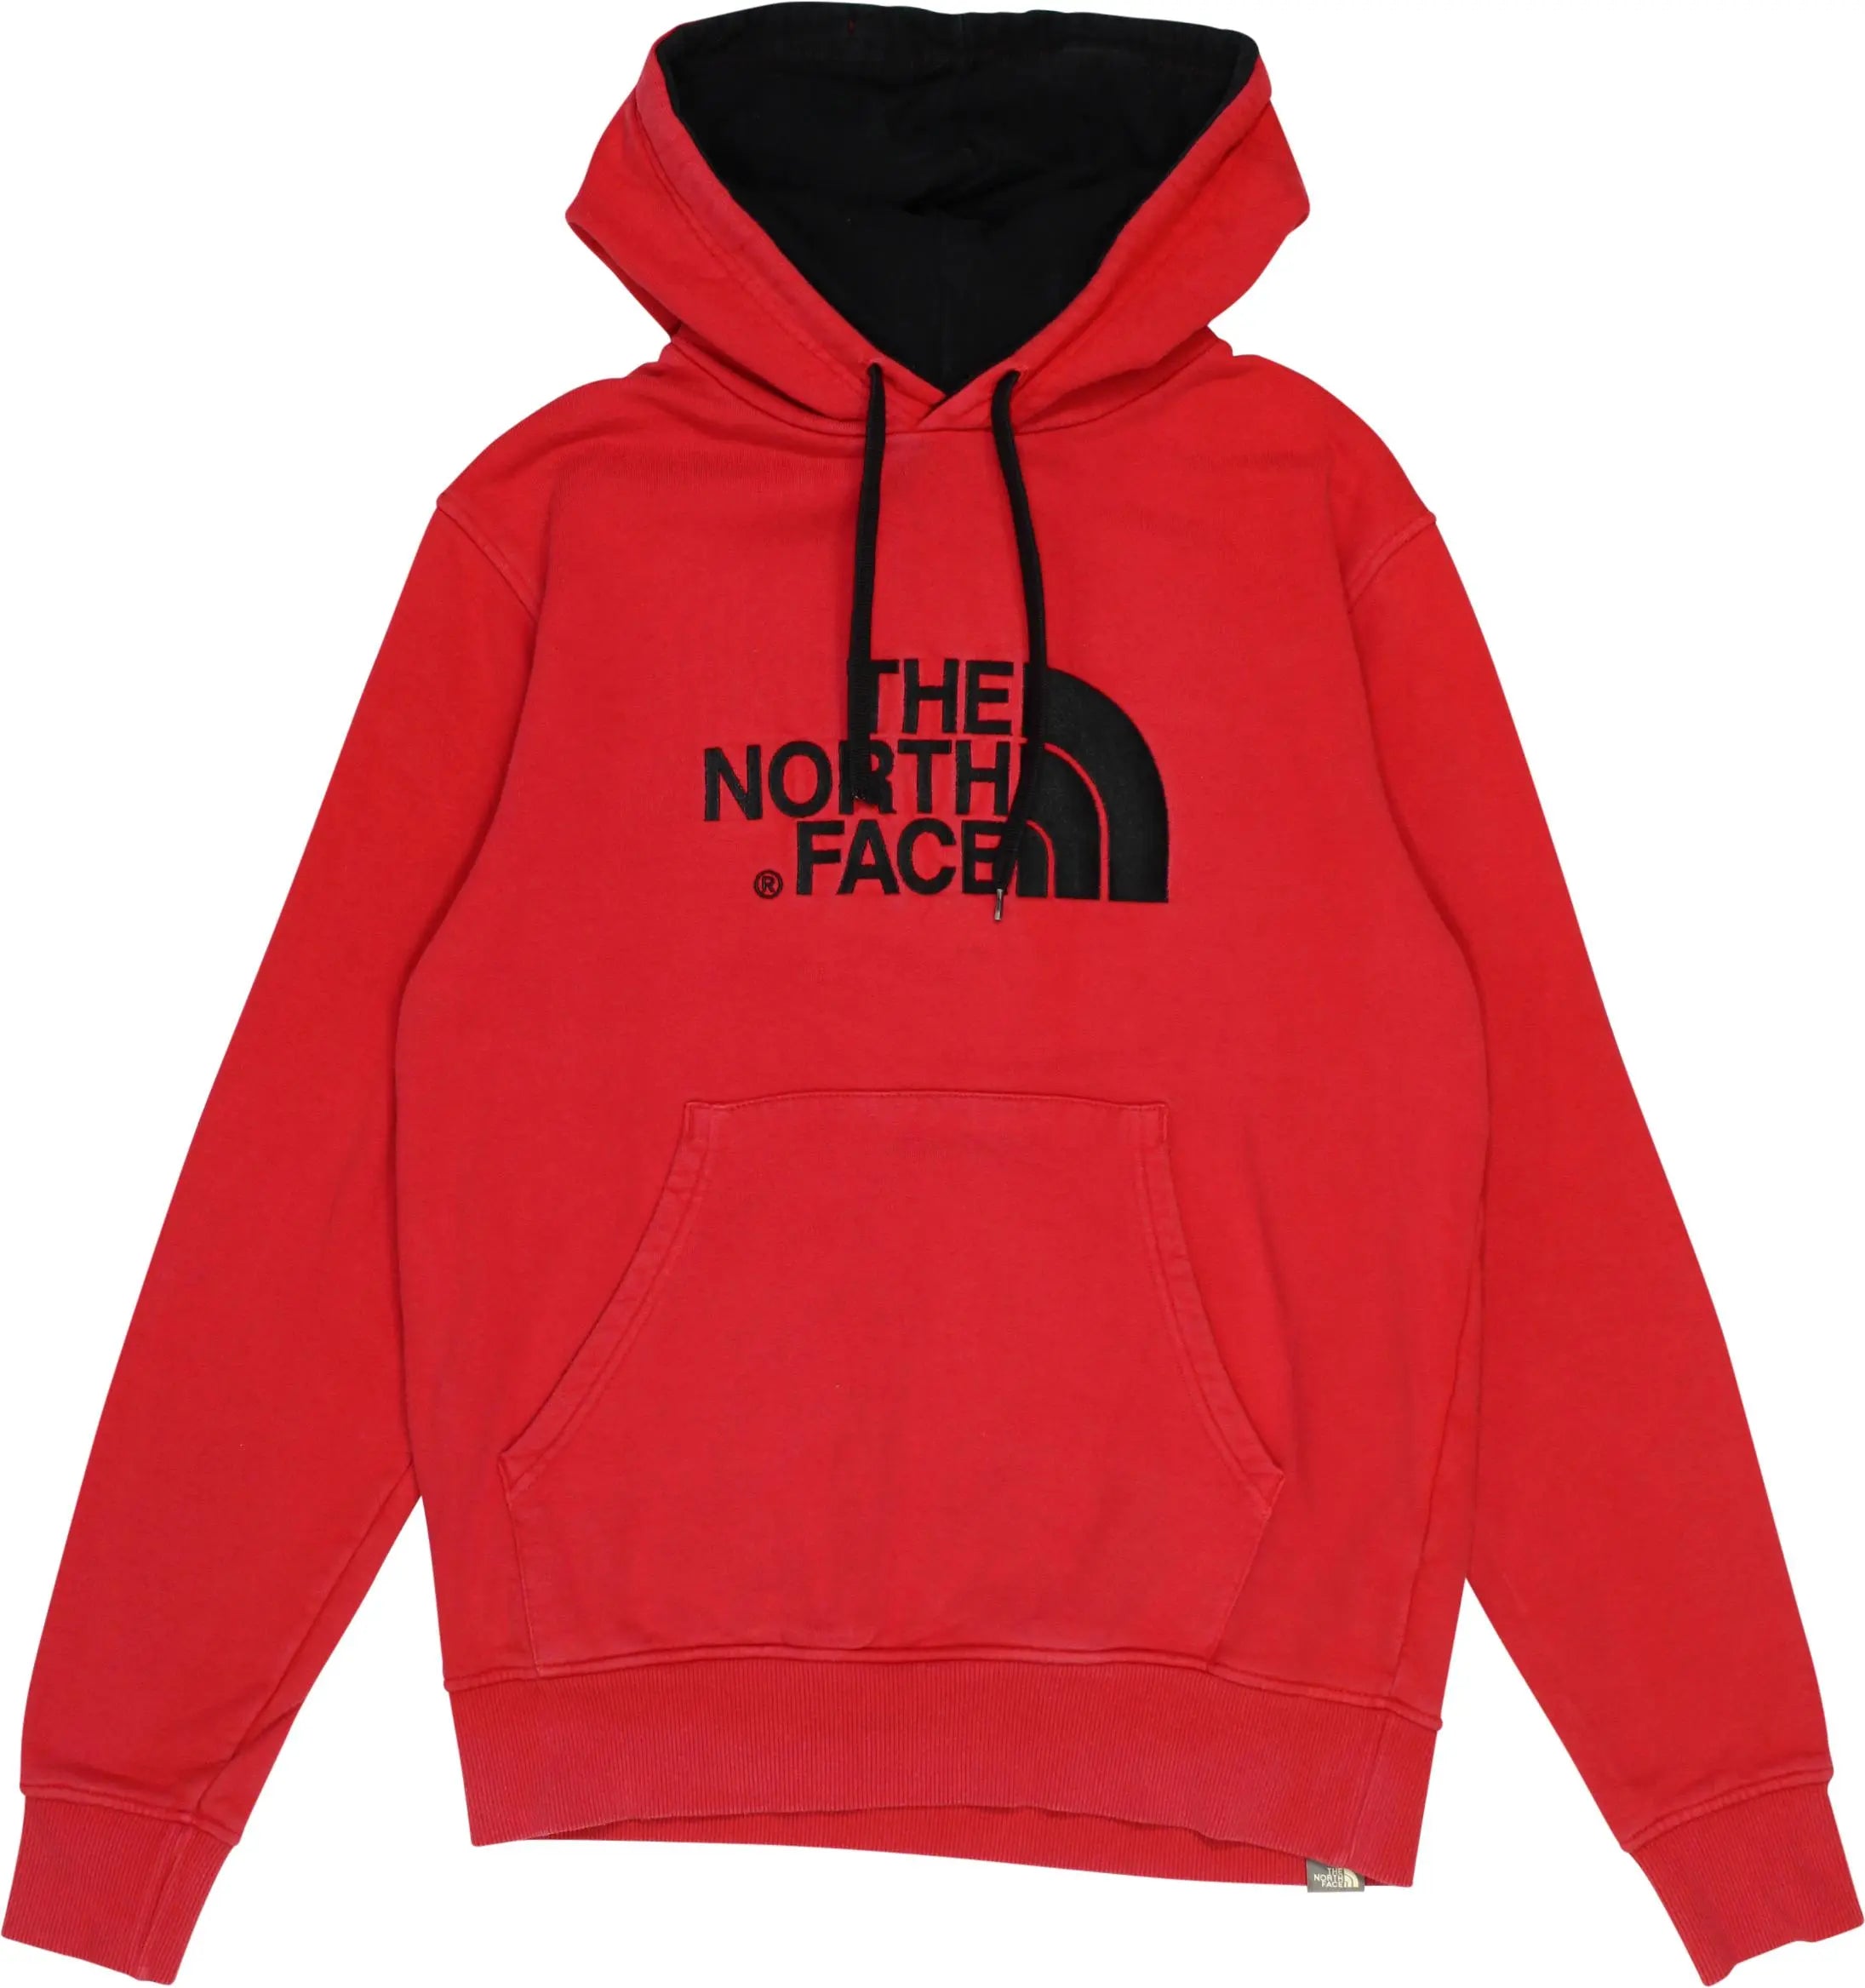 The North Face - Red Hoodie by The North Face- ThriftTale.com - Vintage and second handclothing